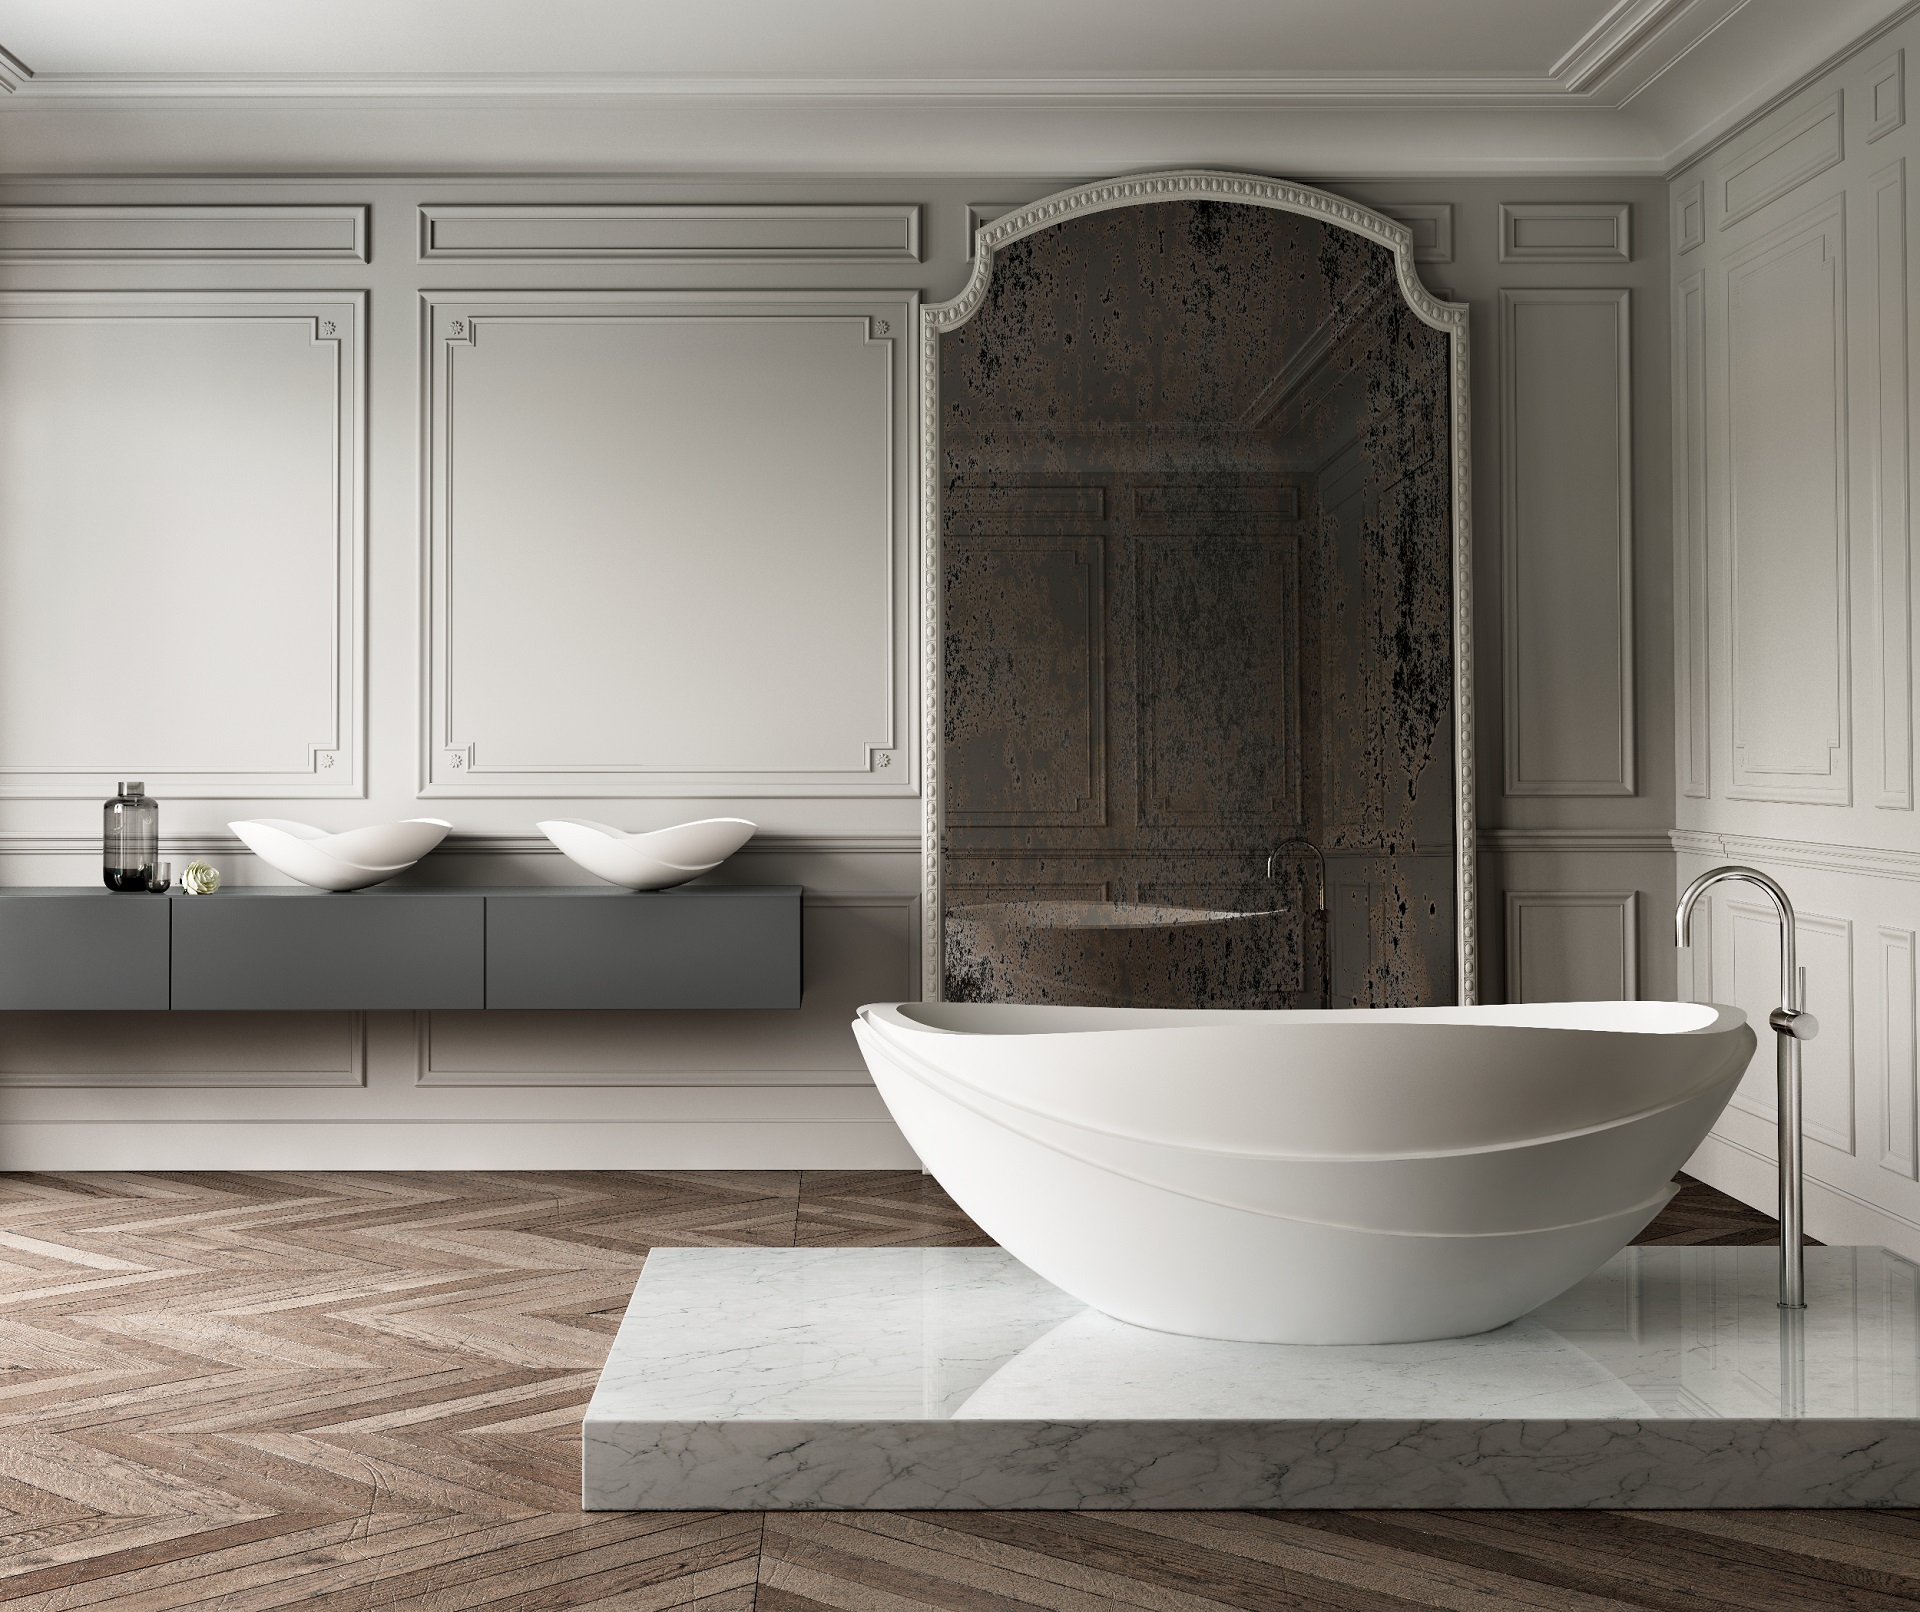 Serenity%20Collection%20by%20Kelly%20Hoppen%20MBE%20 %20Serenity%20Bath%20and%20Basins%20in%20Diamond%20White, Design Authority